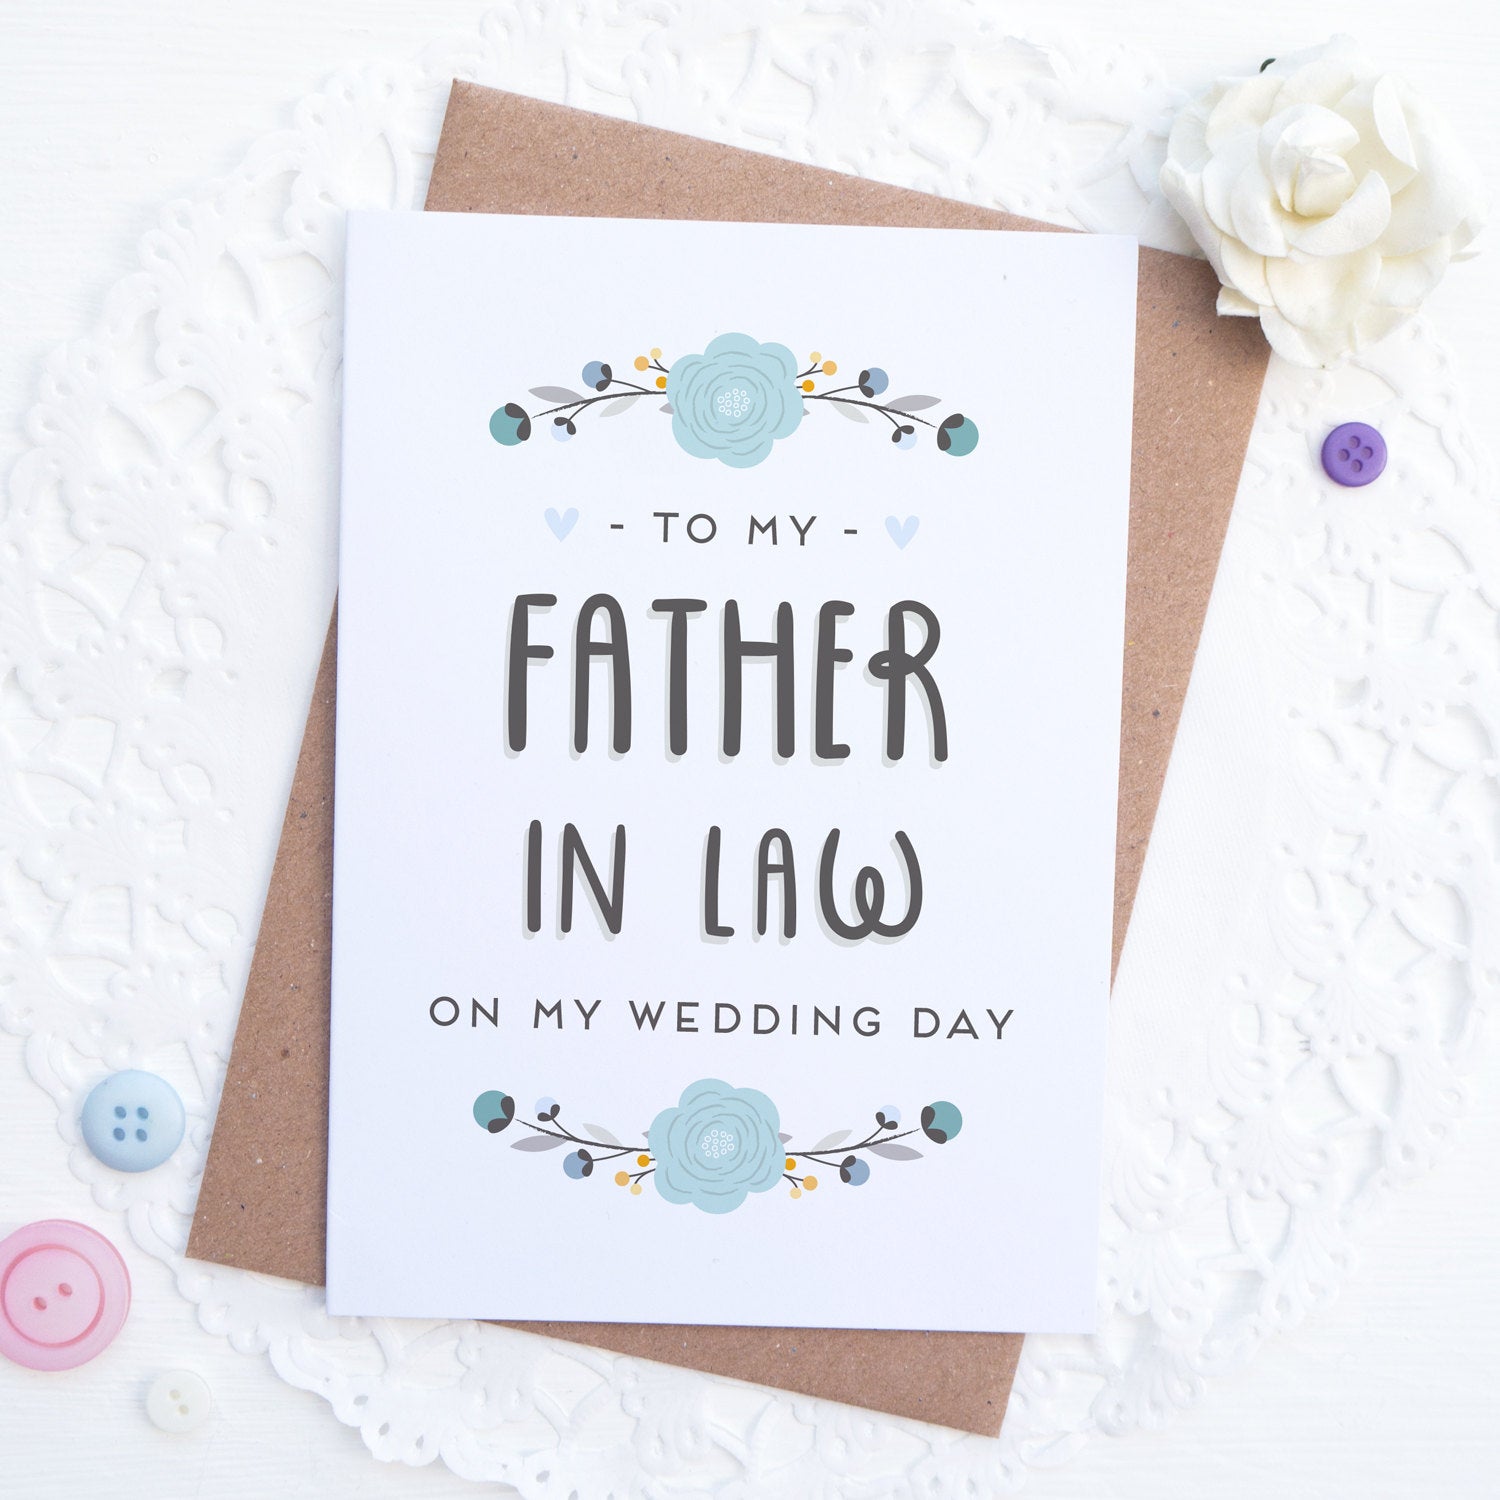 To my father in law on my wedding day card in blue